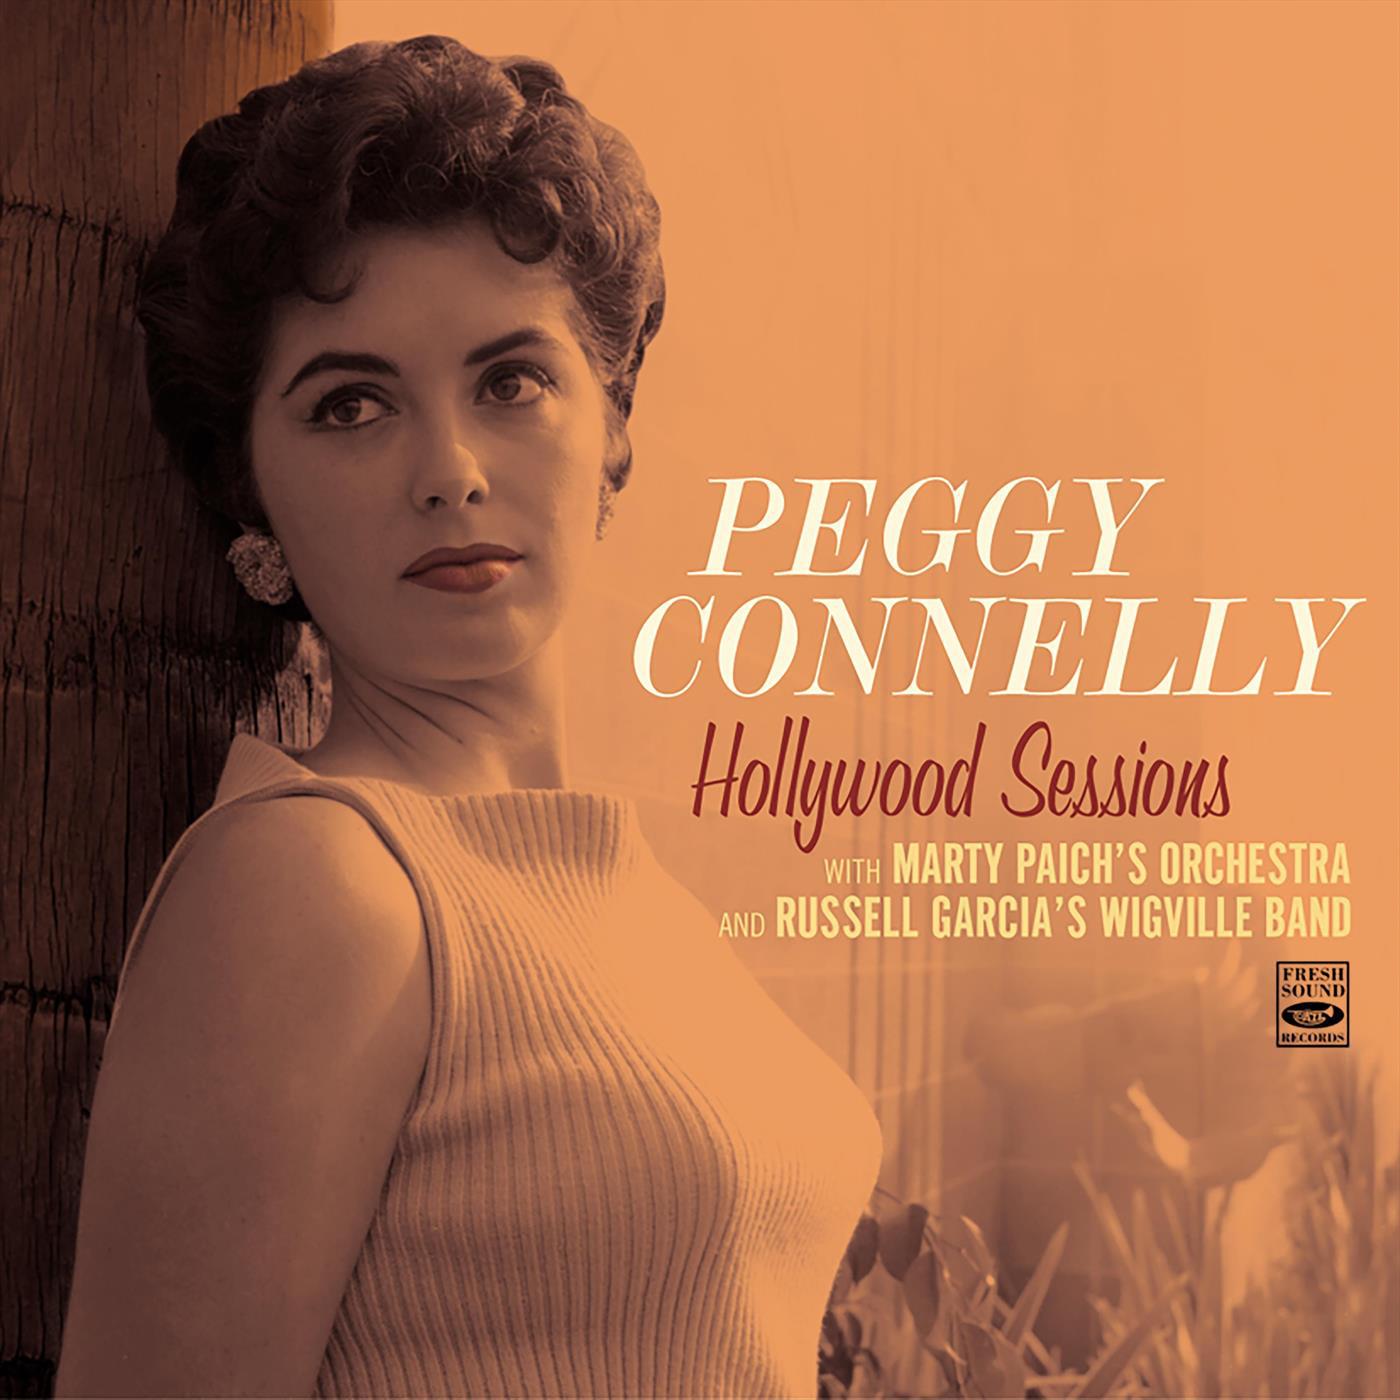 Peggy Connelly. Hollywood Sessions